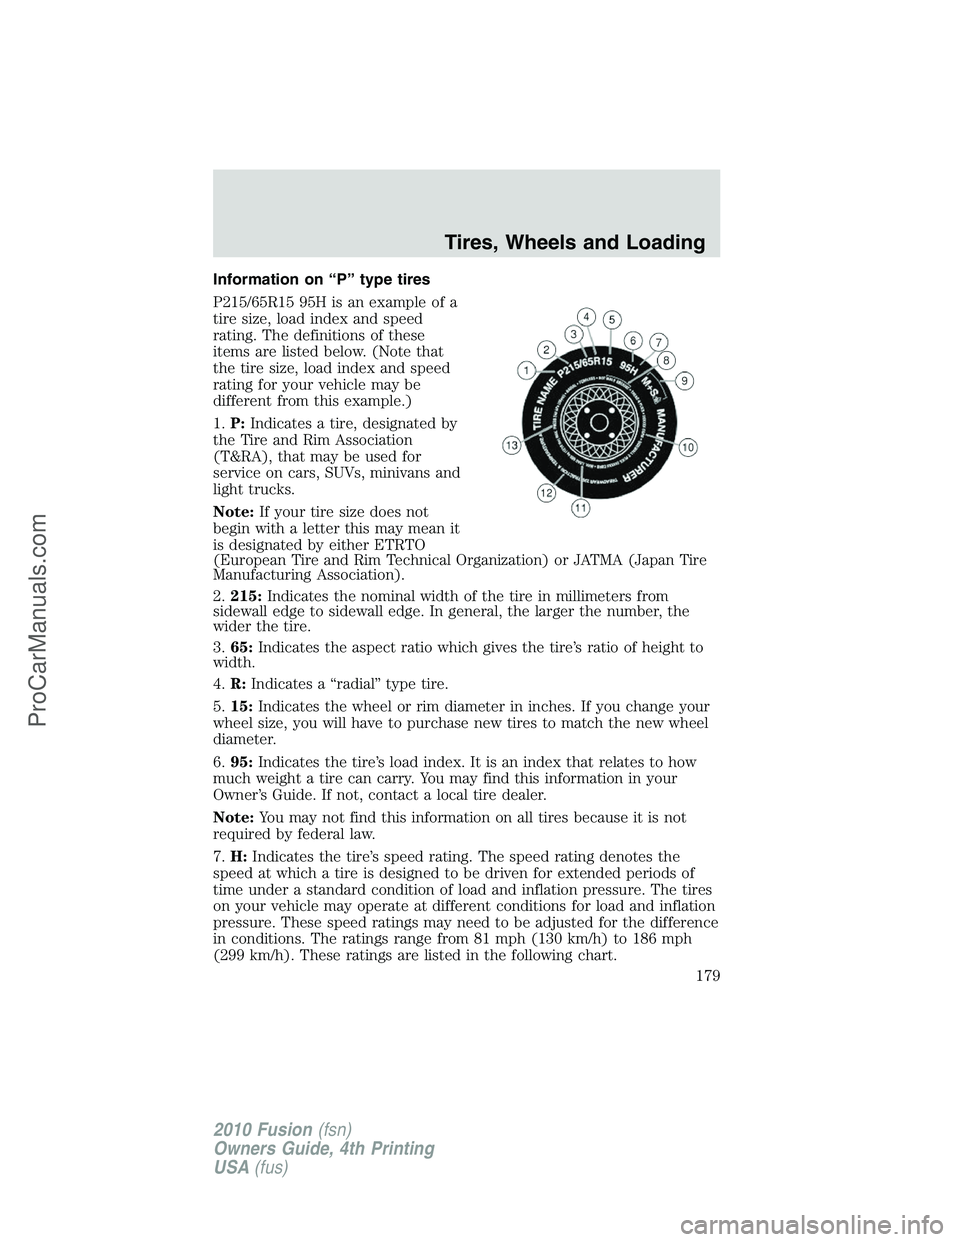 FORD FUSION 2010  Owners Manual Information on “P” type tires
P215/65R15 95H is an example of a
tire size, load index and speed
rating. The definitions of these
items are listed below. (Note that
the tire size, load index and sp